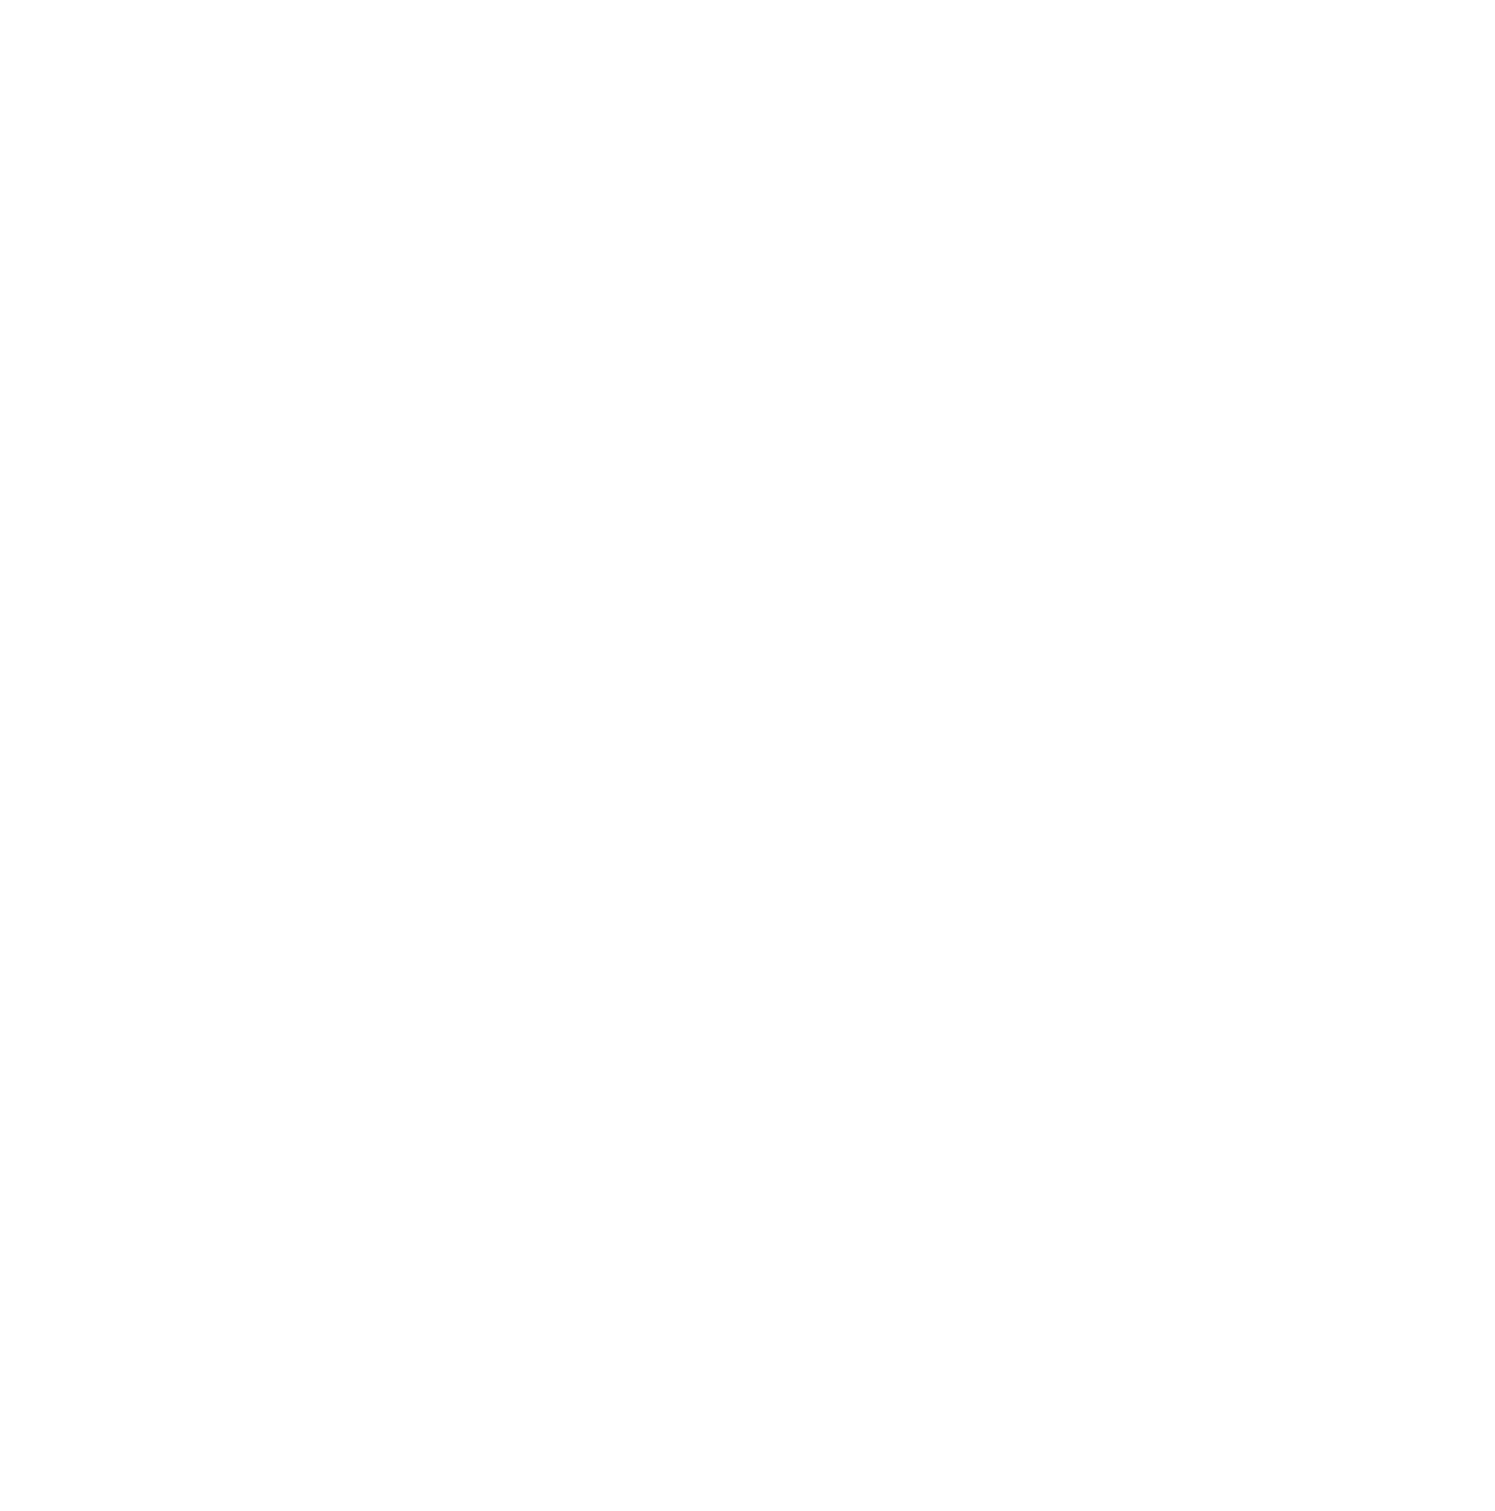 Northern Policy Foundation